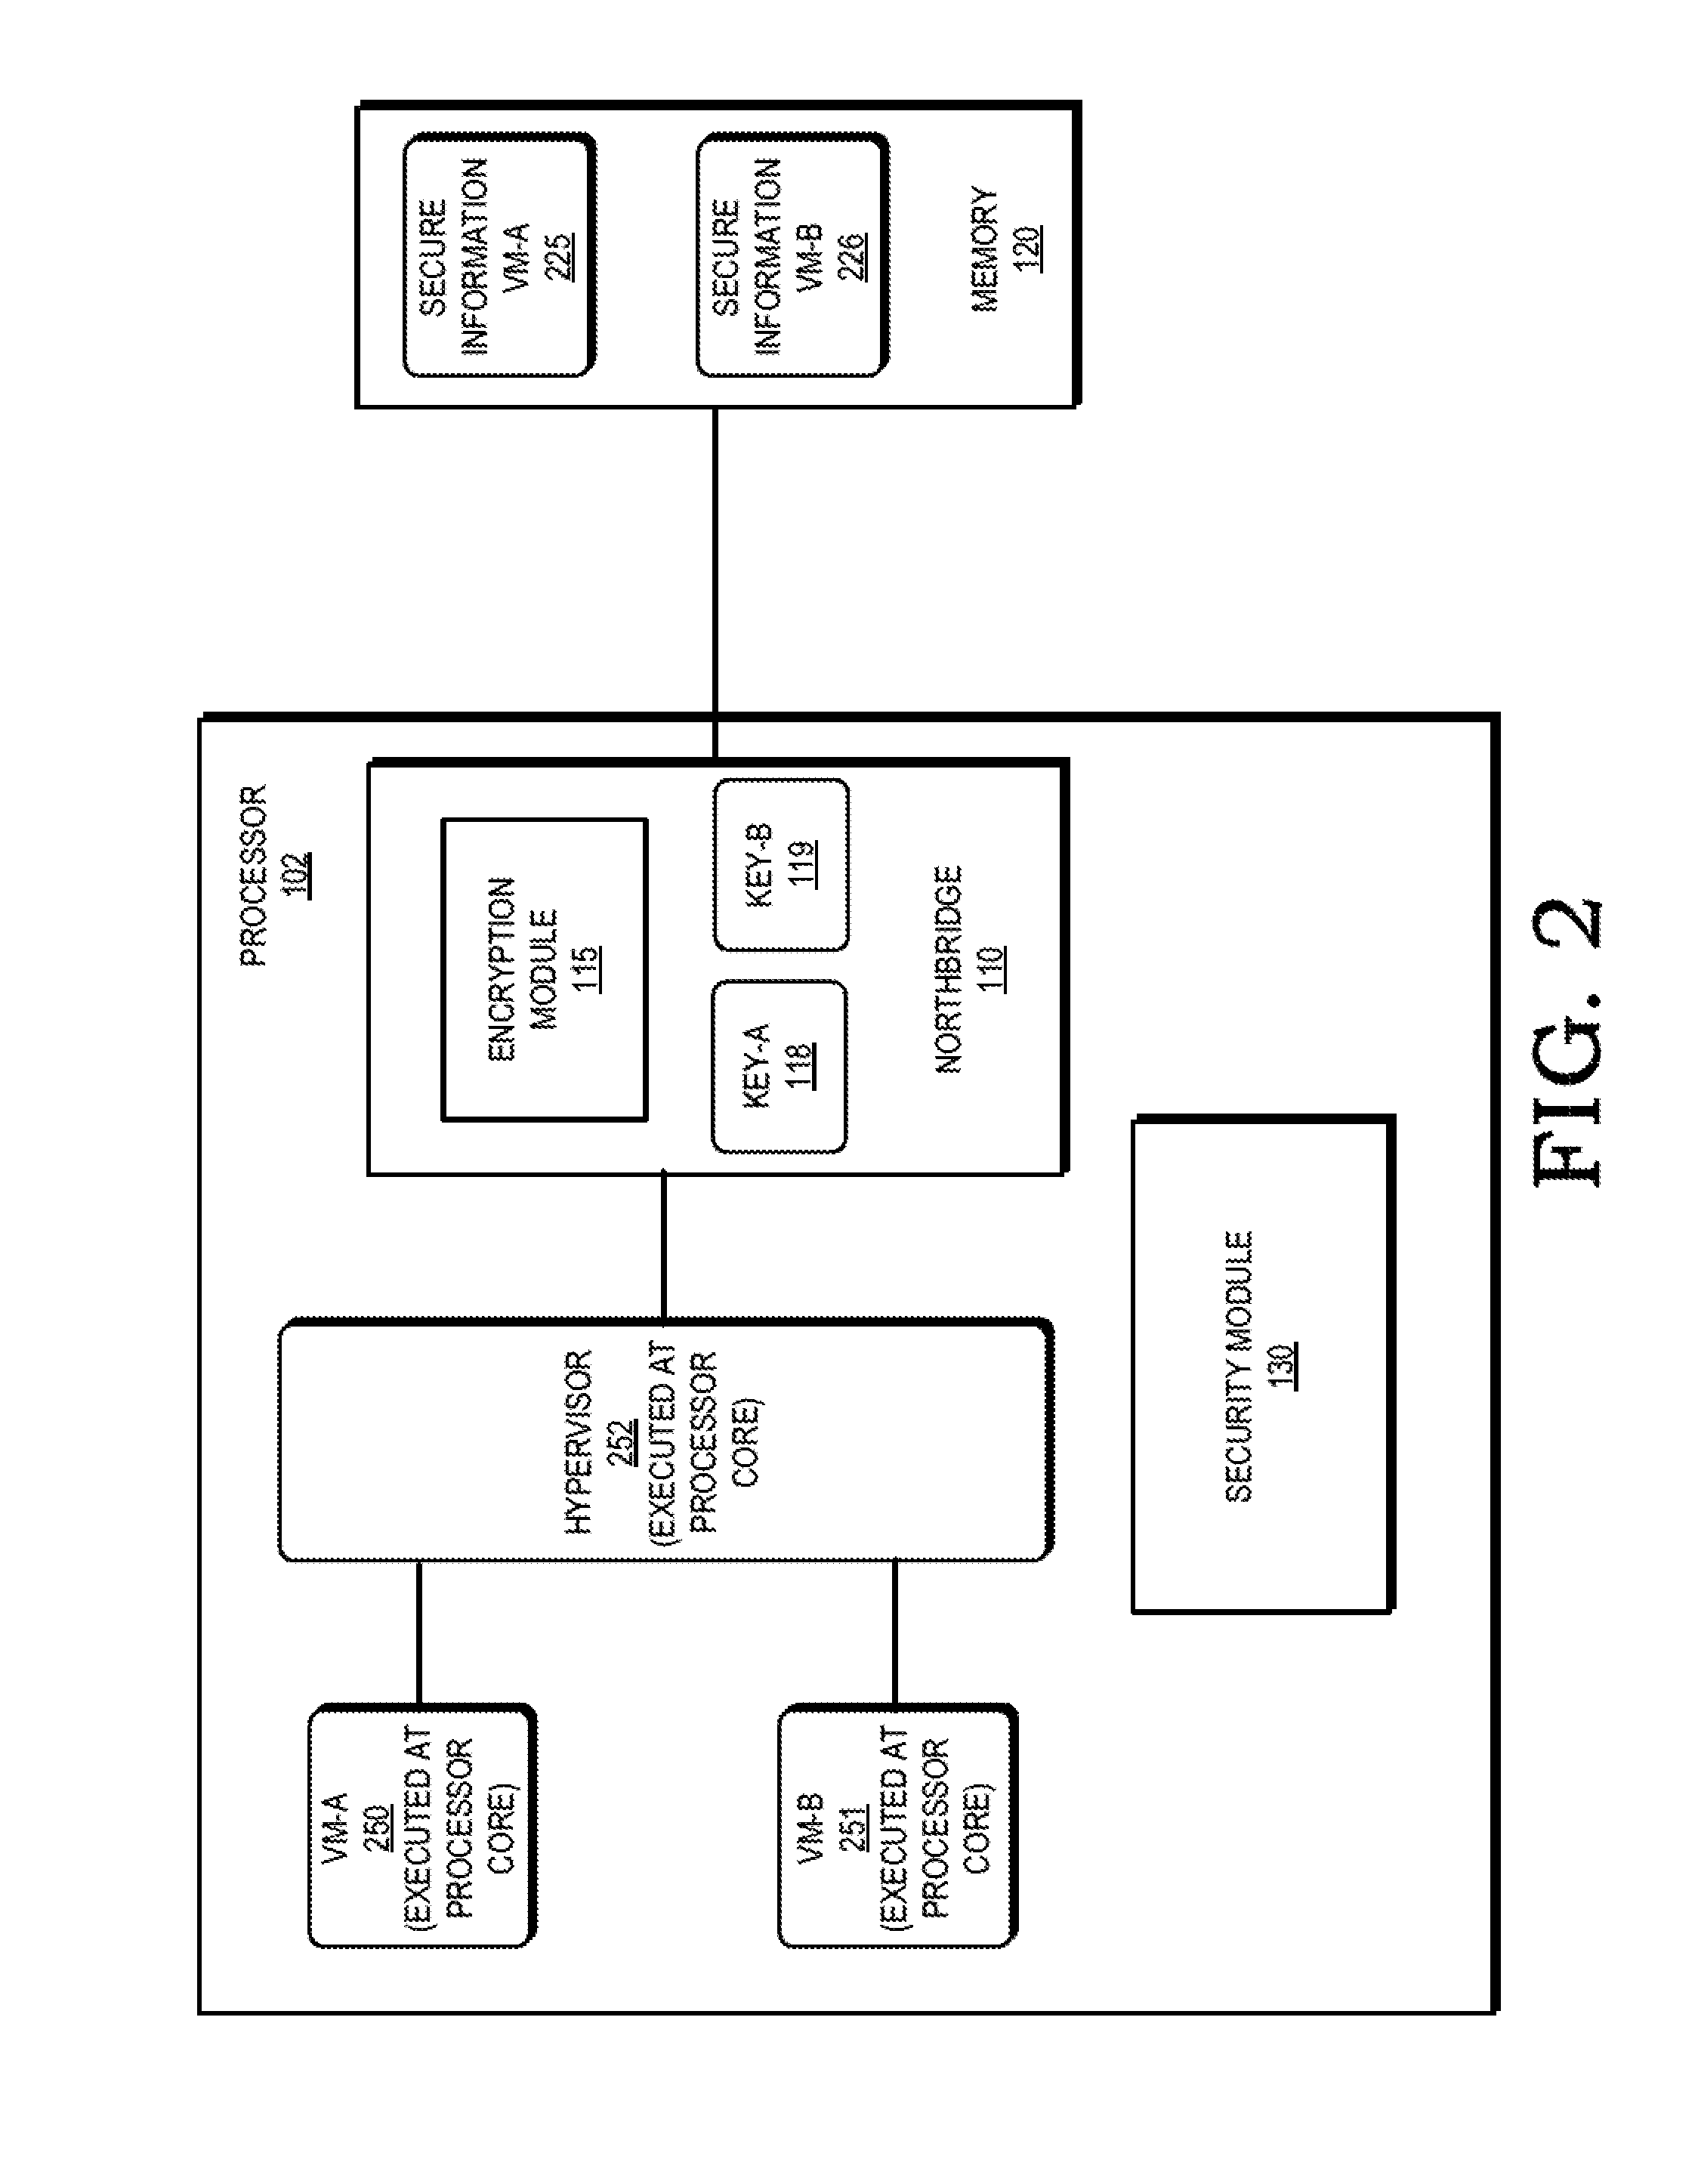 Cryptographic protection of information in a processing system